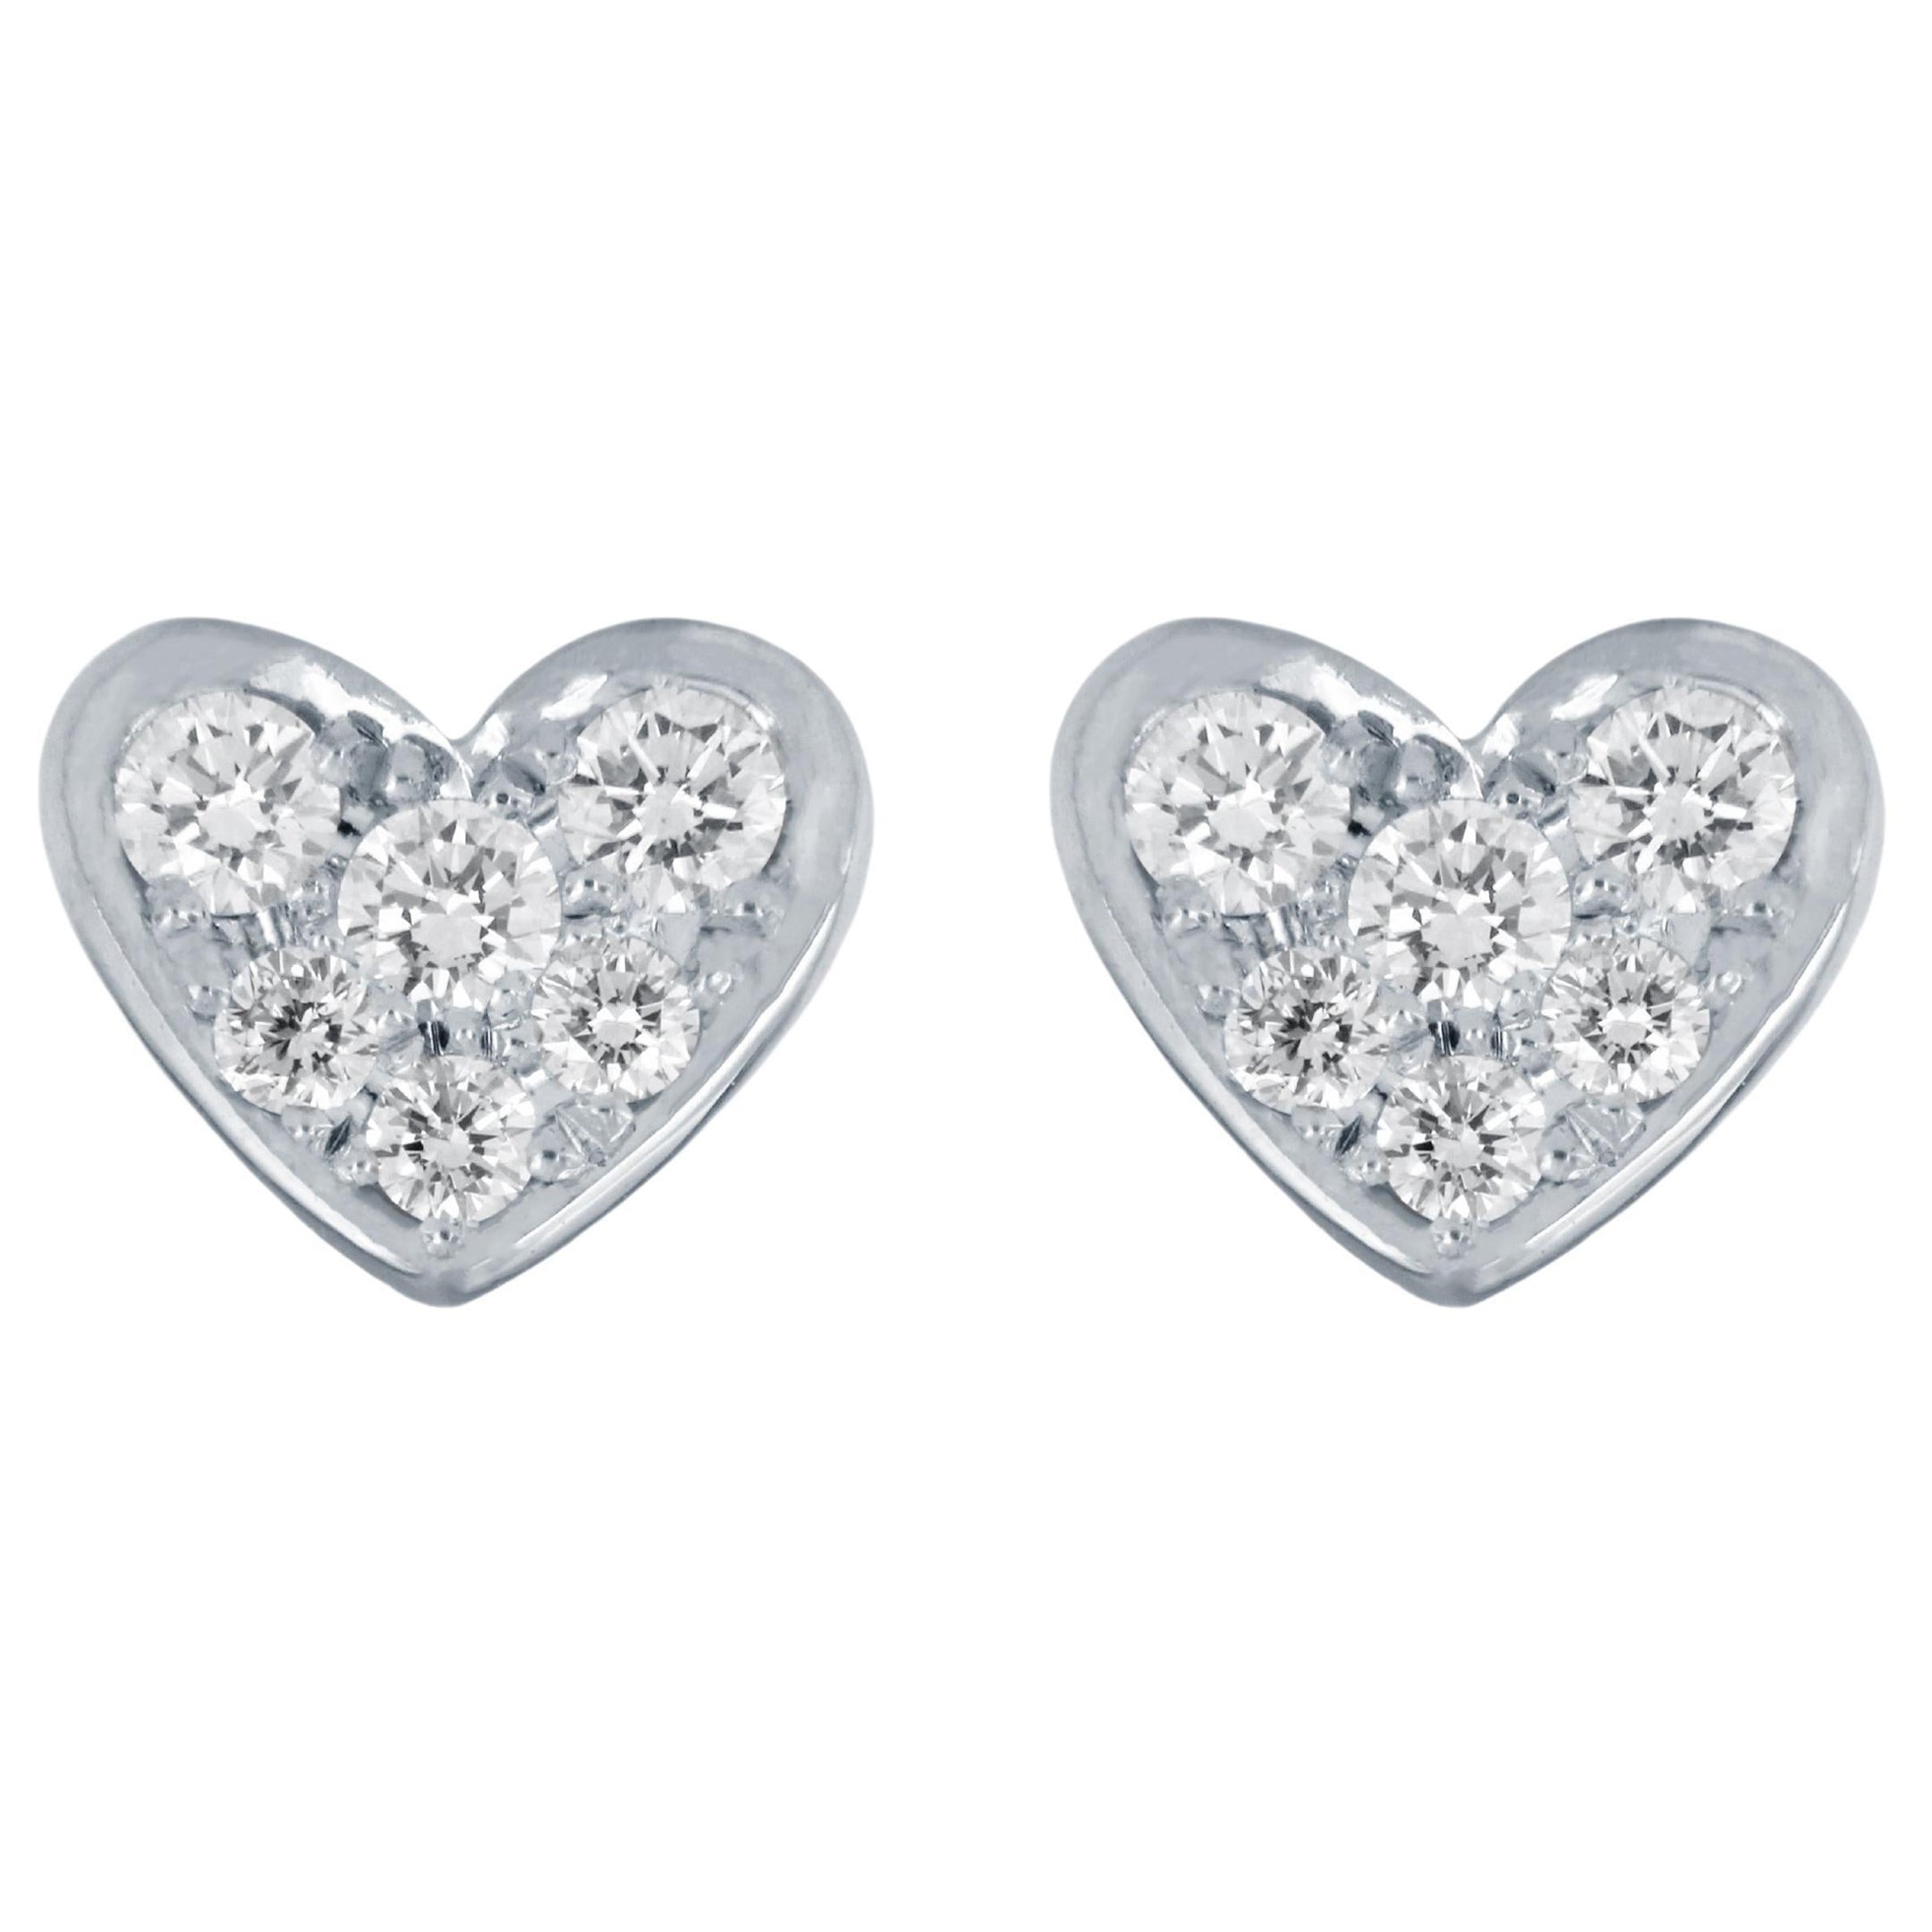 Tiffany & Co. Sentimental Heart White Gold Earrings with Diamonds For Sale